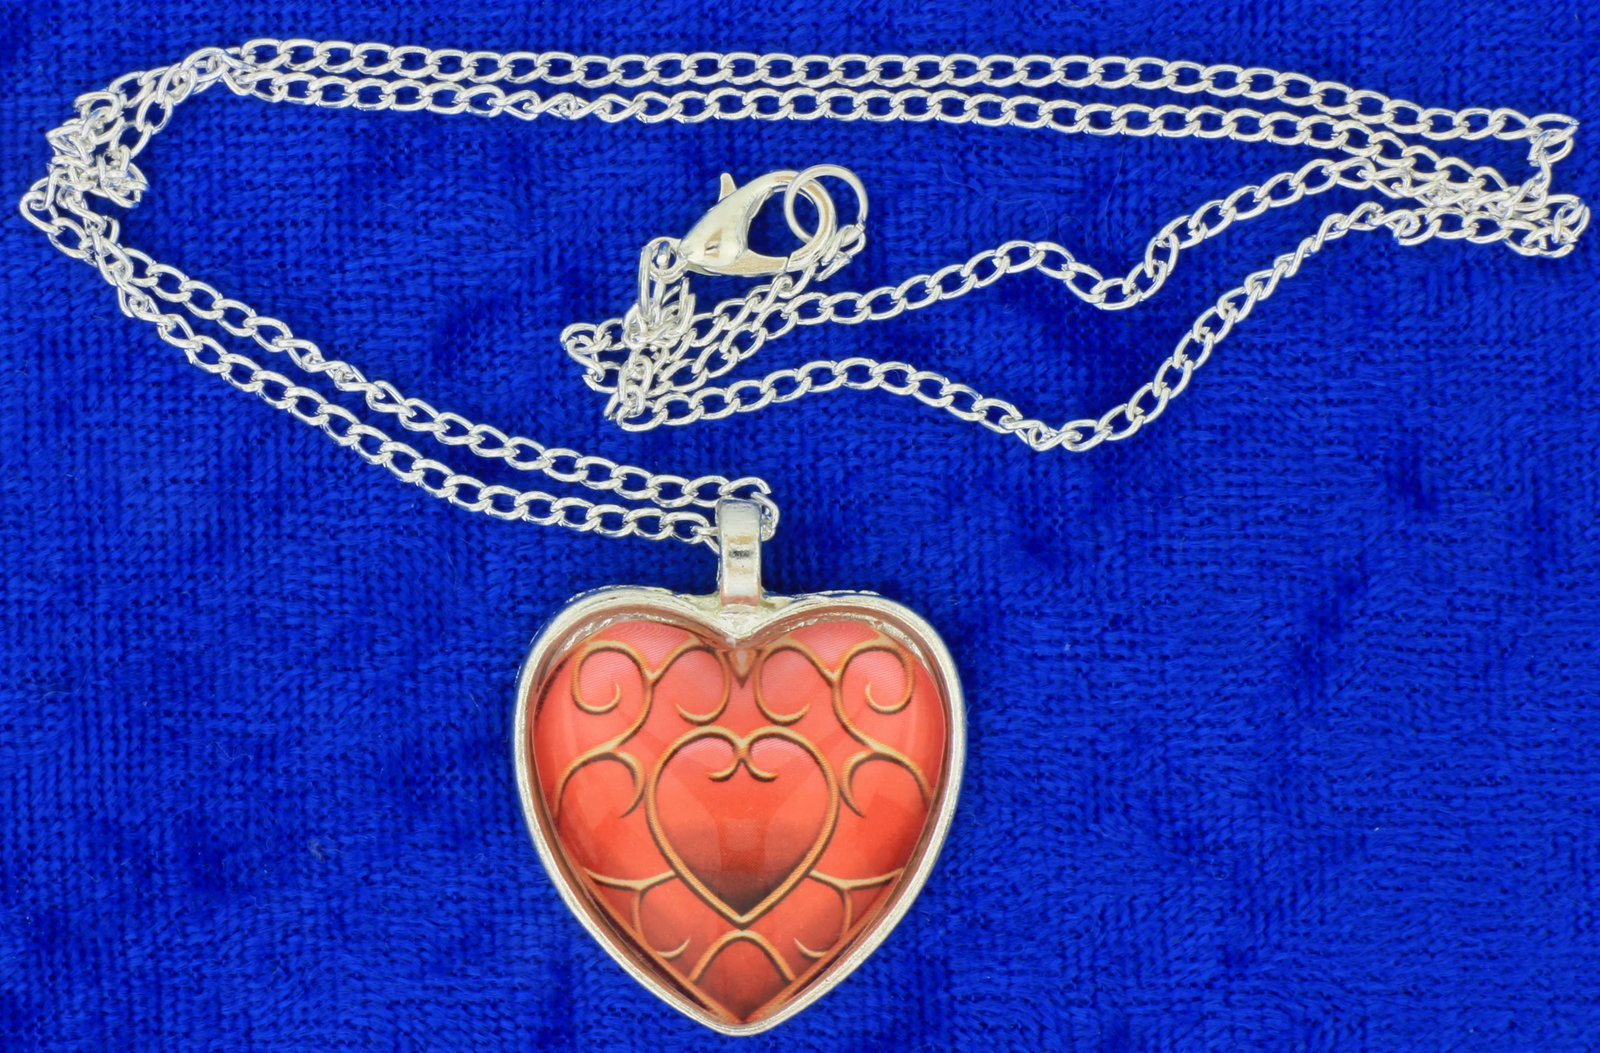 Legend of Zelda Skyward Heart Necklace Cabochon Game Chain Length Choice - $5.99 - $7.49